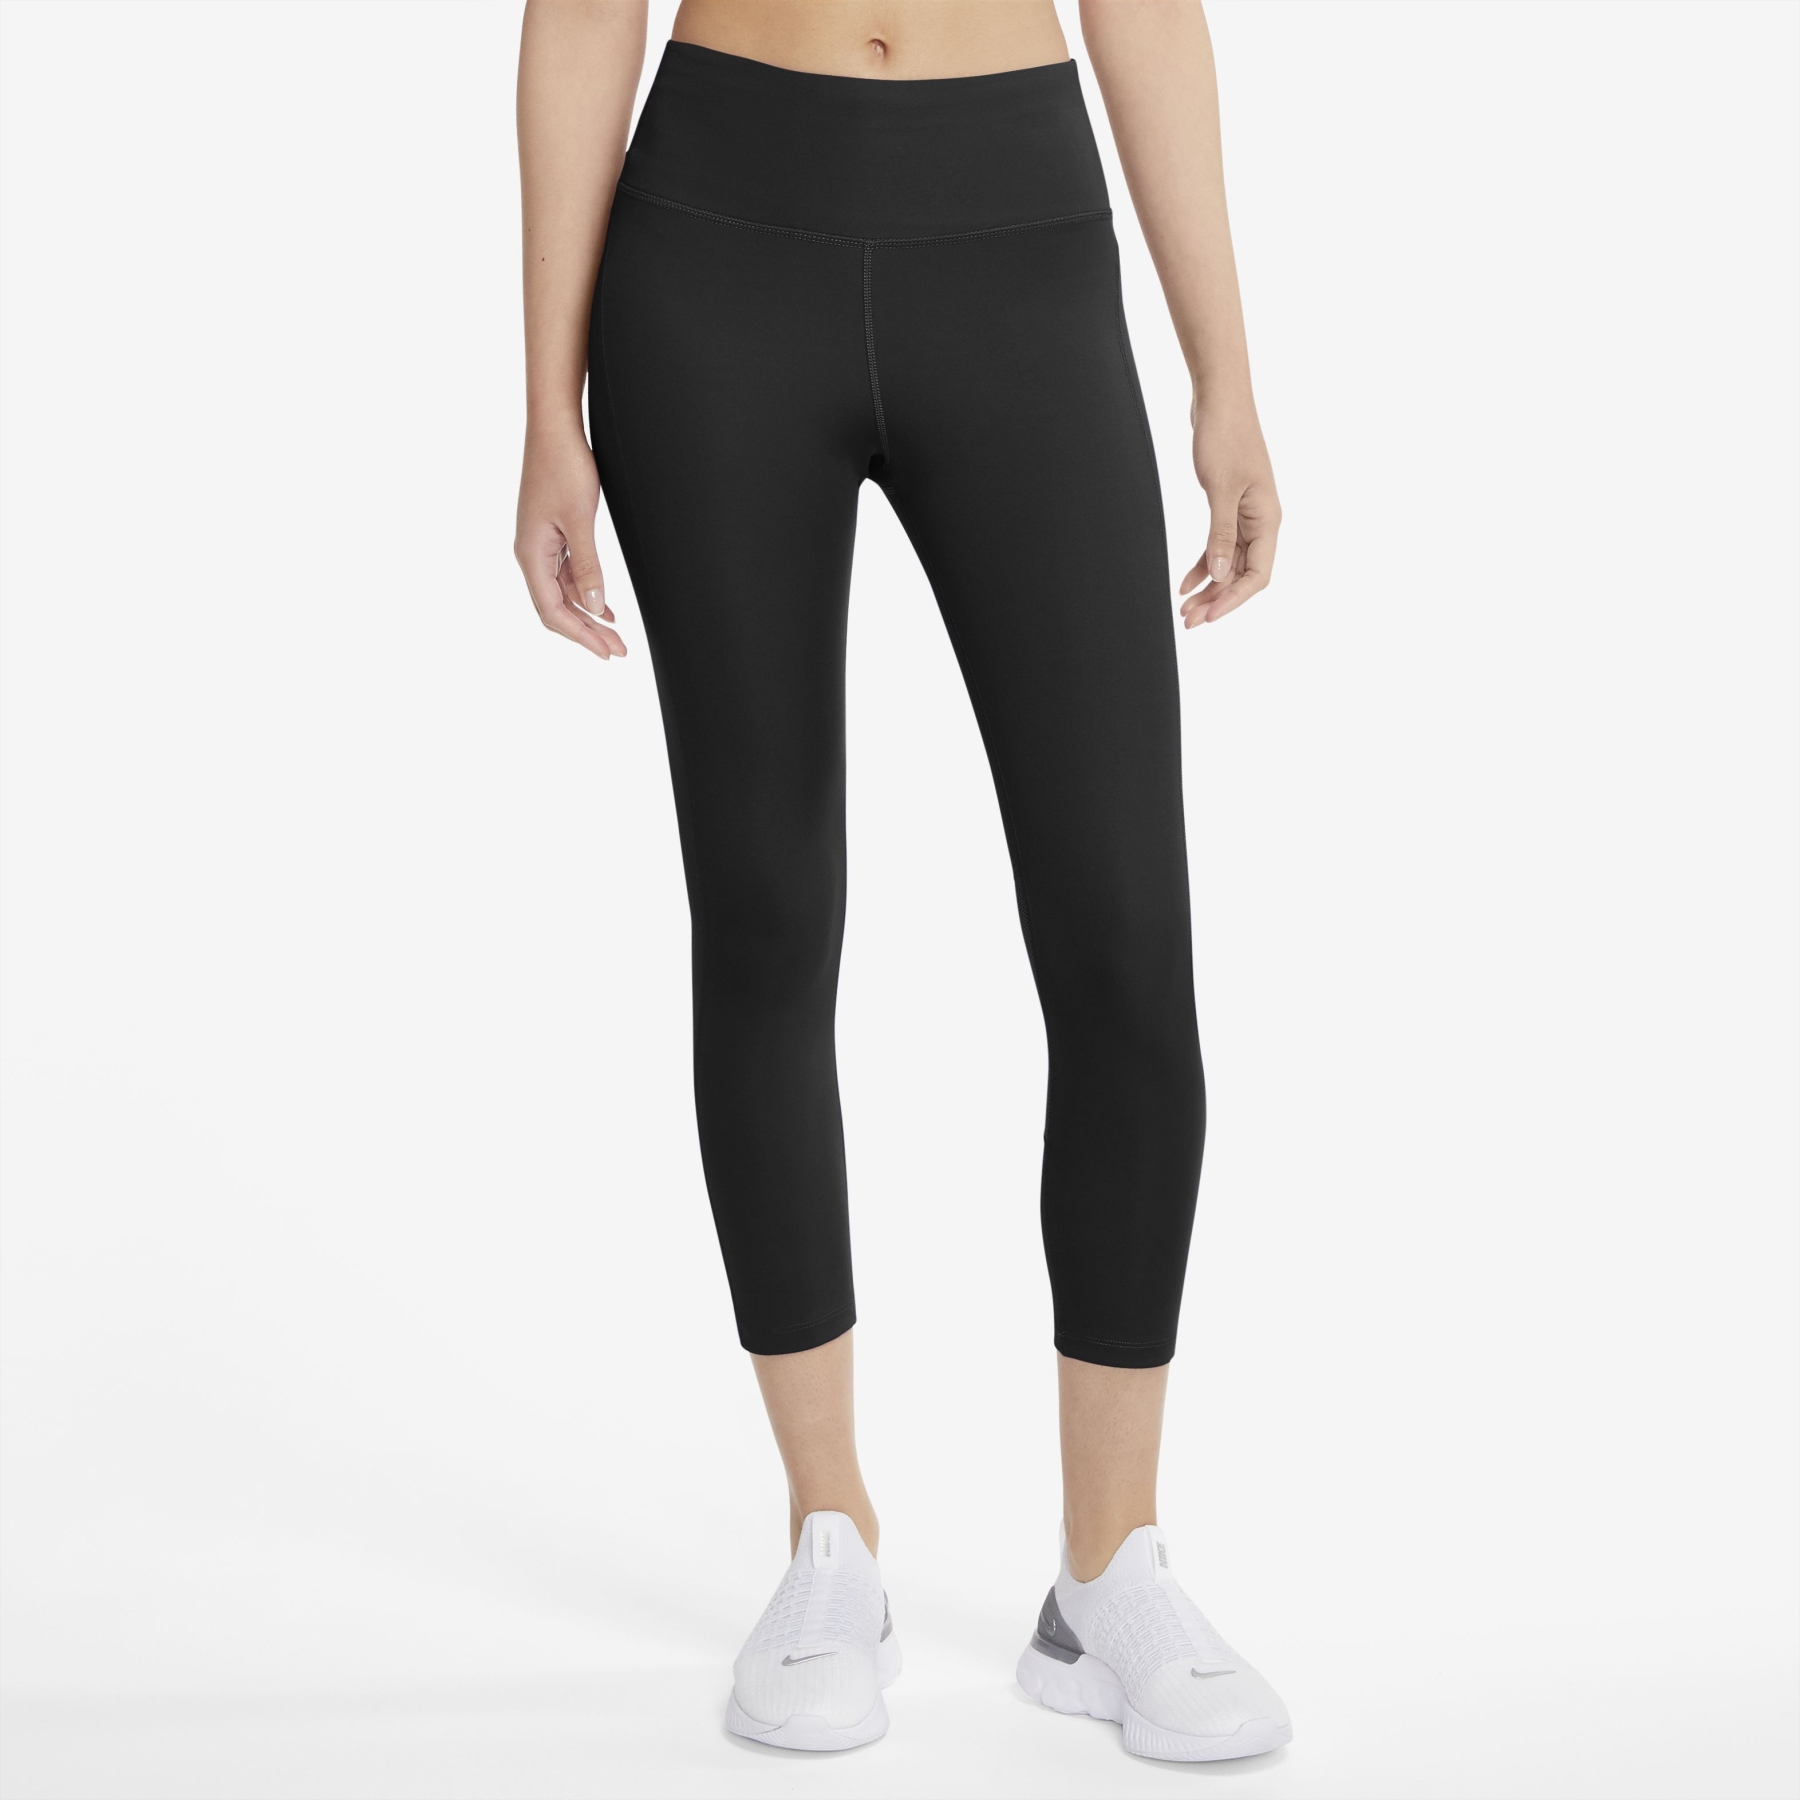 Nike Epic Fast Cropped Running Tights Women - black/reflective silver  CZ9238-010